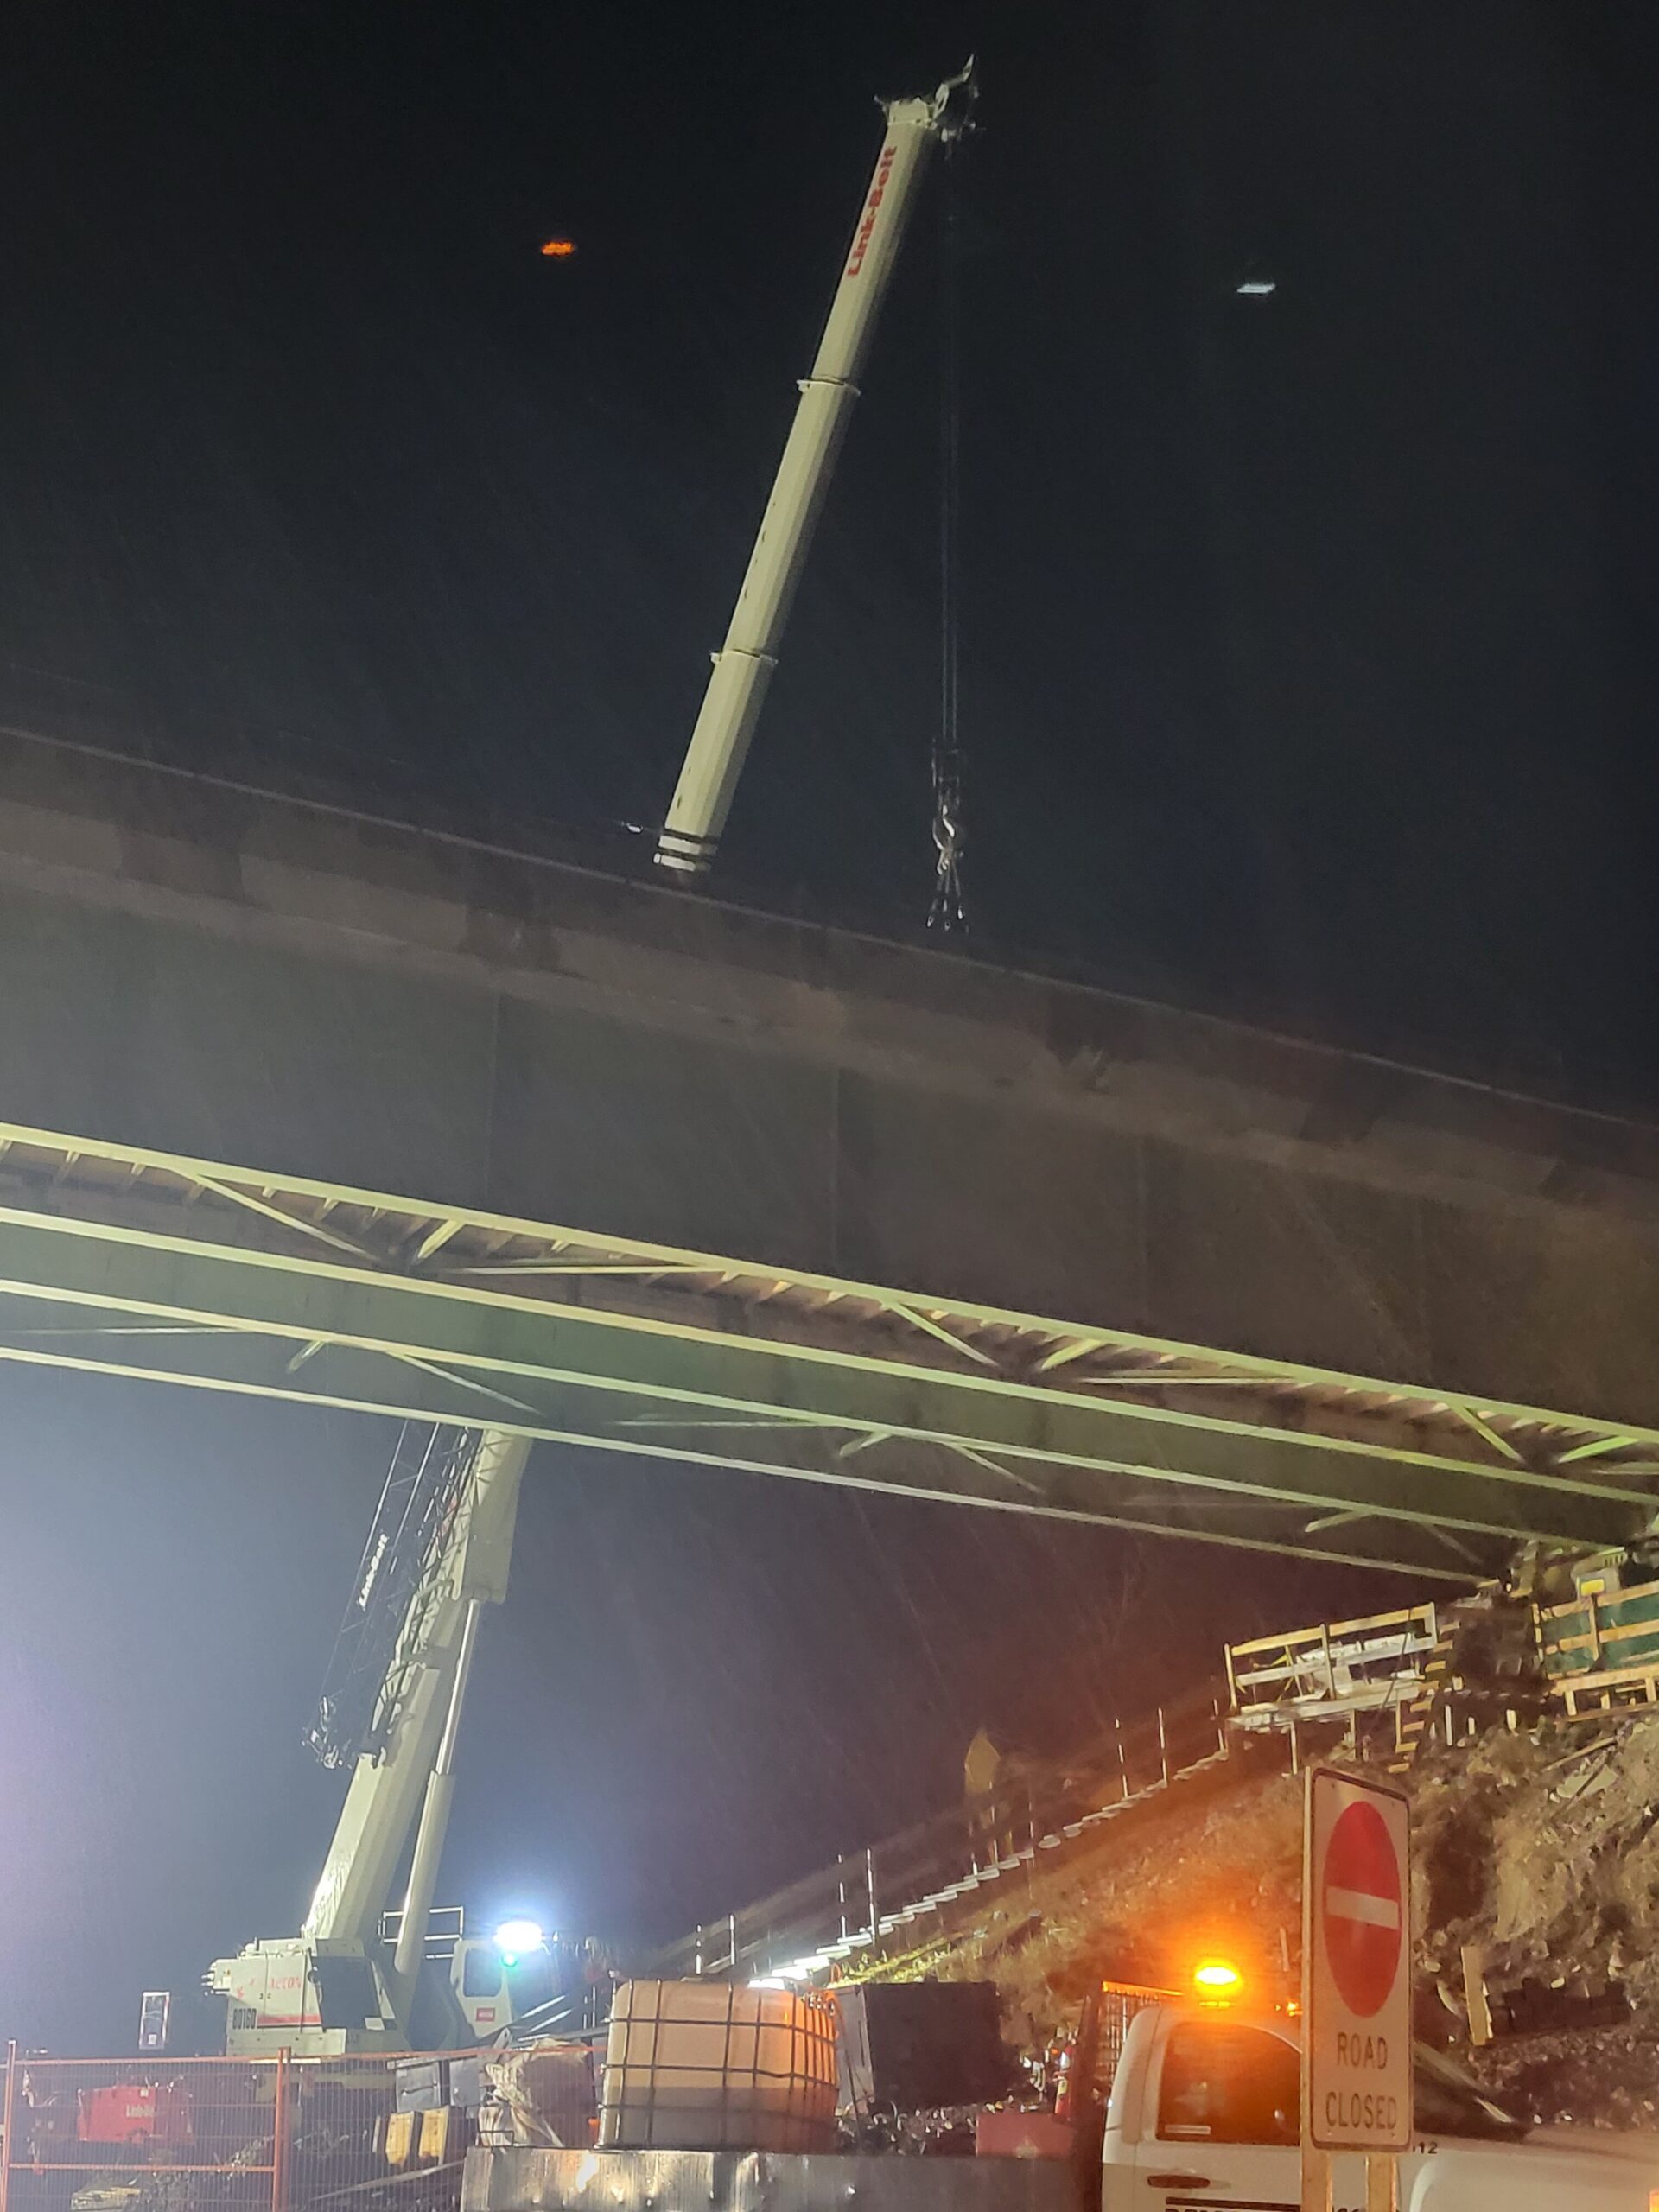 160-ton crane hooked-up to the approach girder for removal